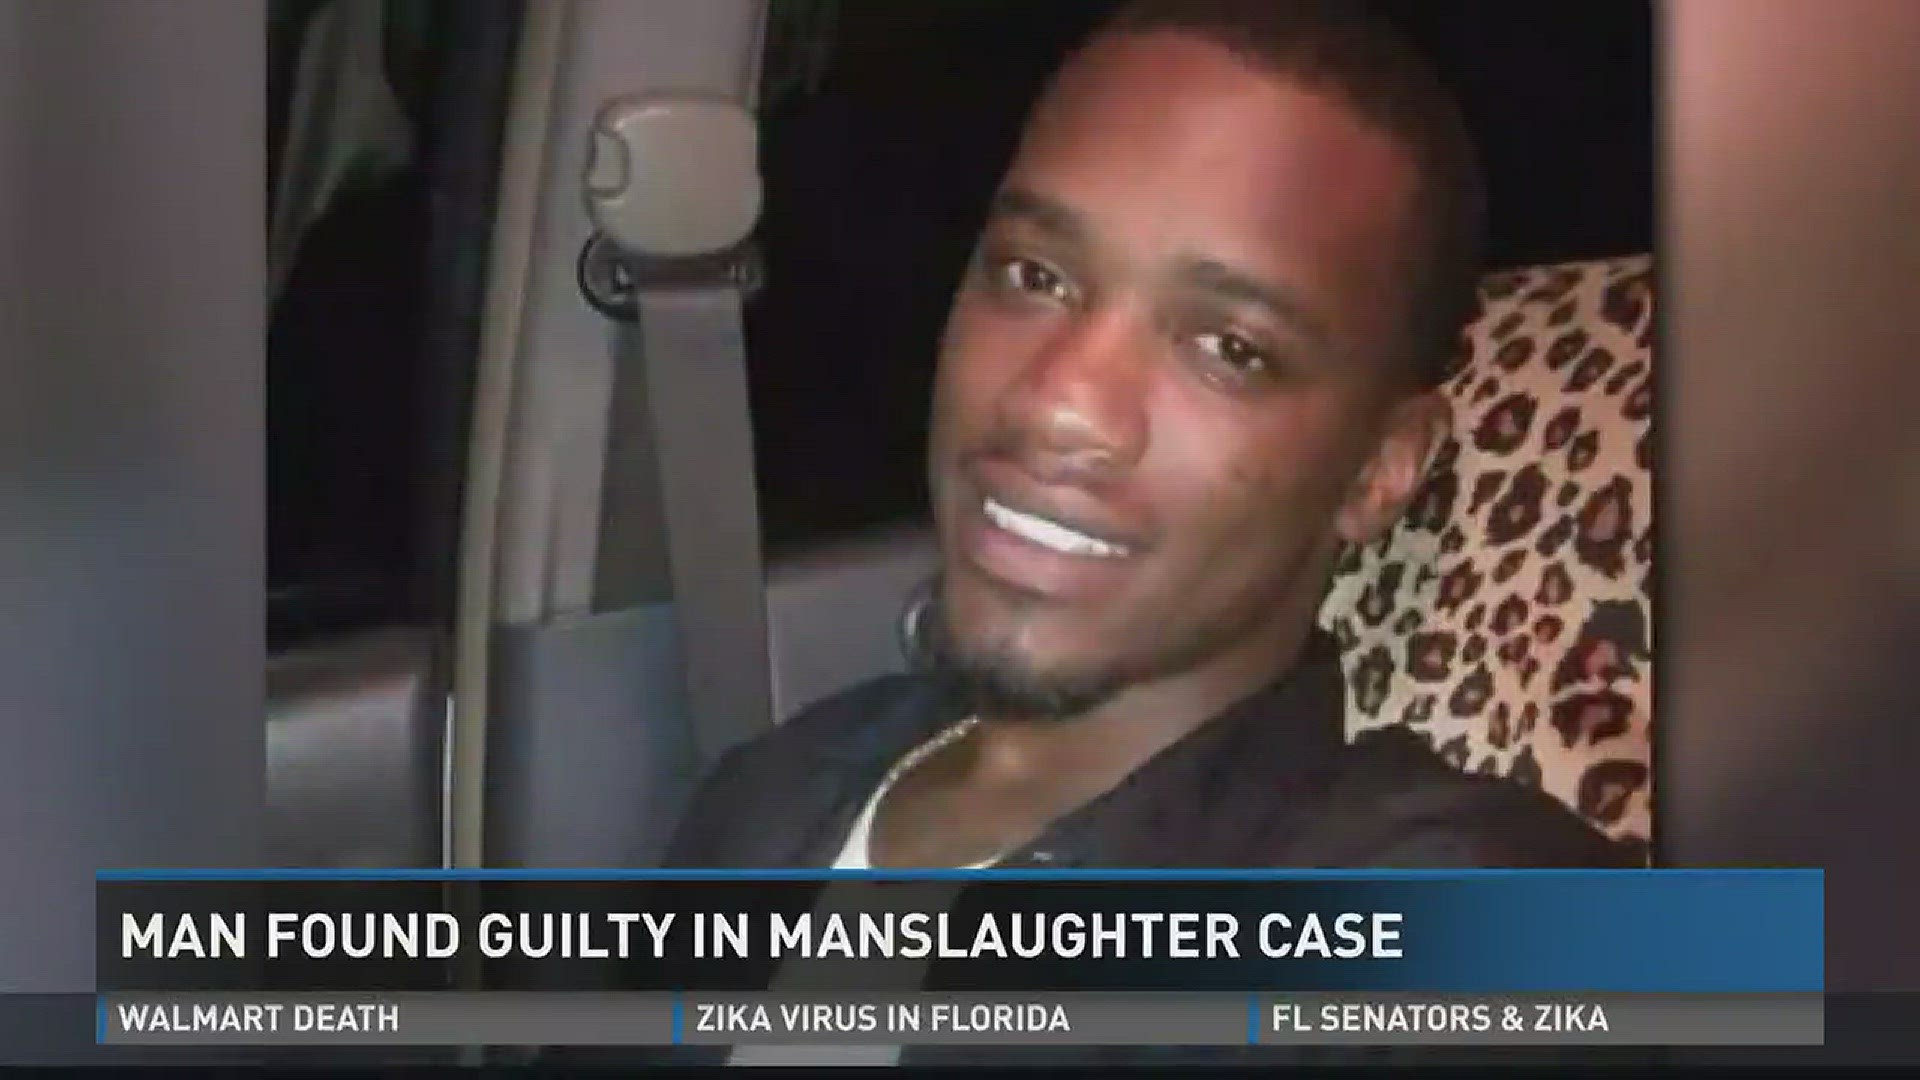 Man found guilty in manslaughter case